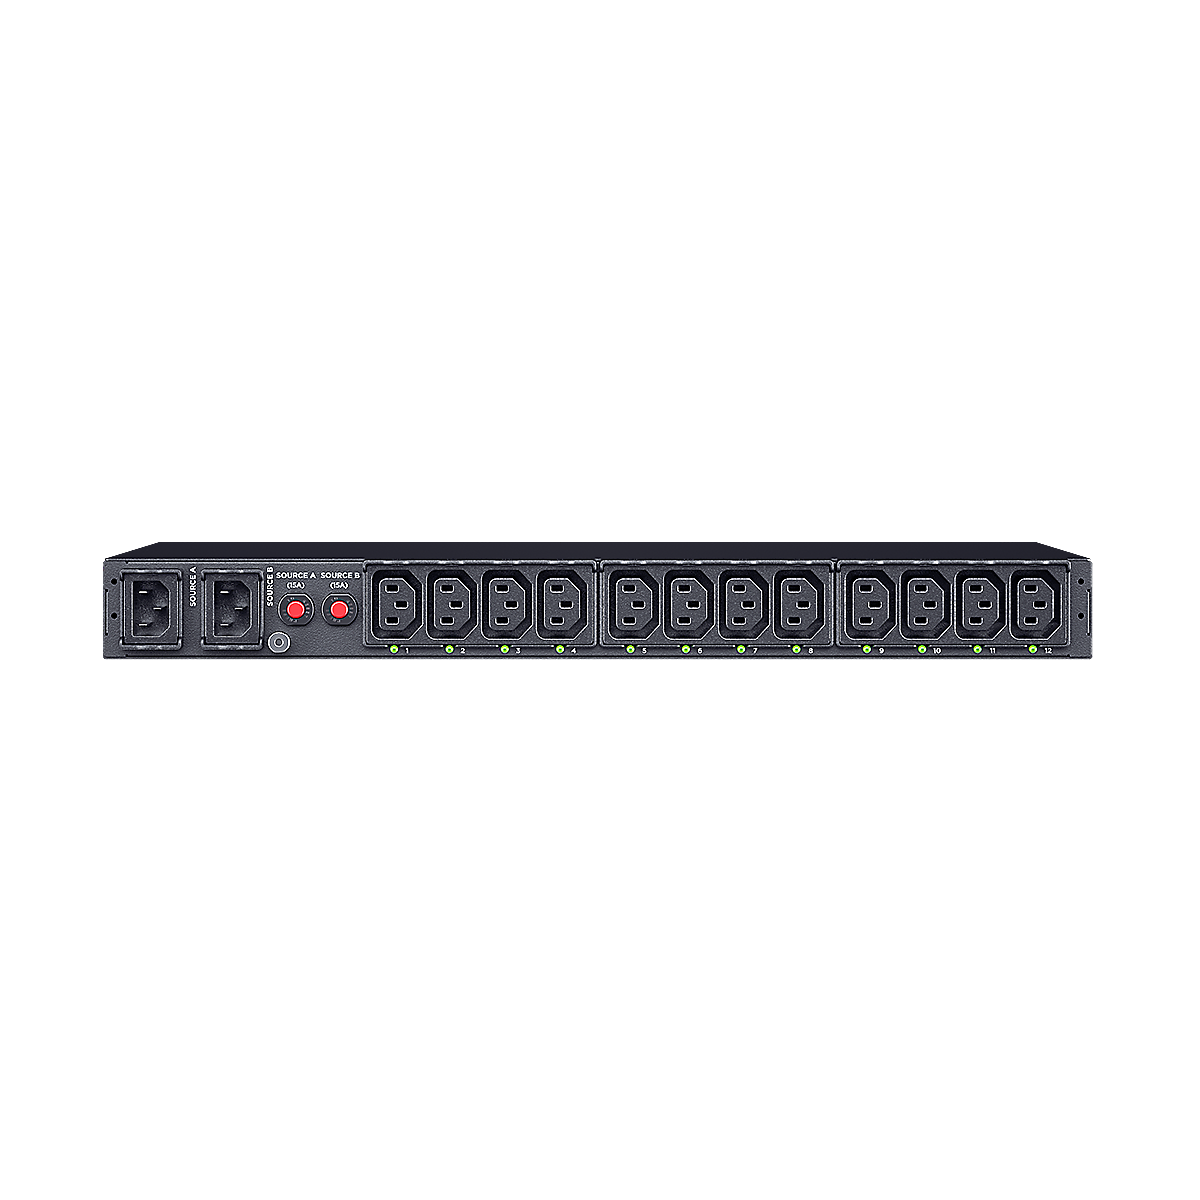 CyberPower Systems Power Distribution Unit - PDU44004